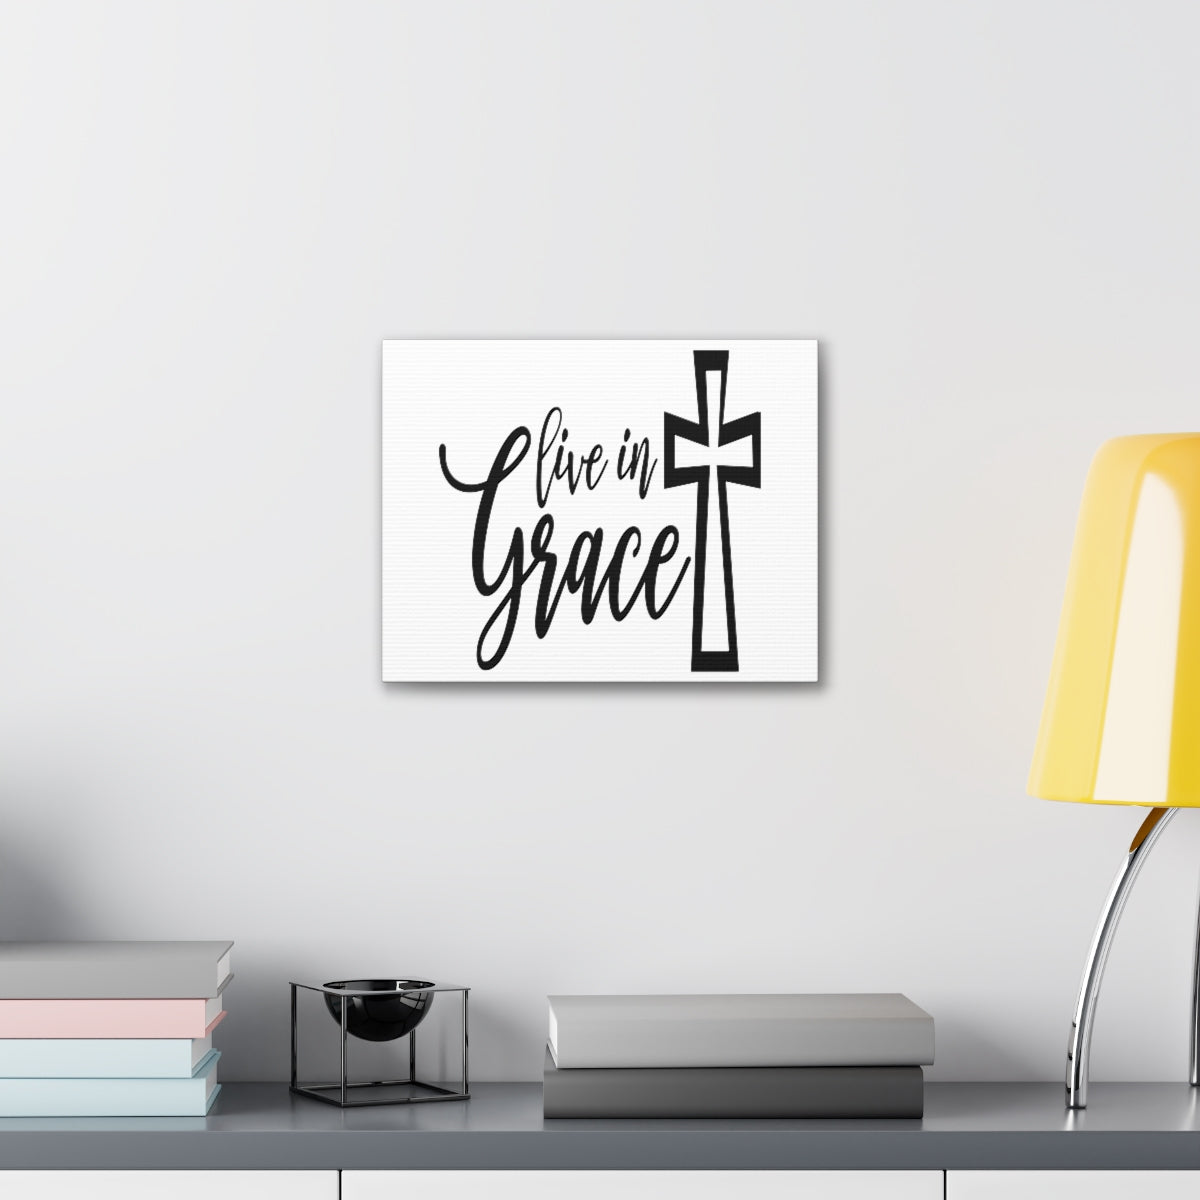 Scripture Walls Live In Grace 2 Corinthians 12:8-9 Christian Wall Art Print Ready to Hang Unframed-Express Your Love Gifts